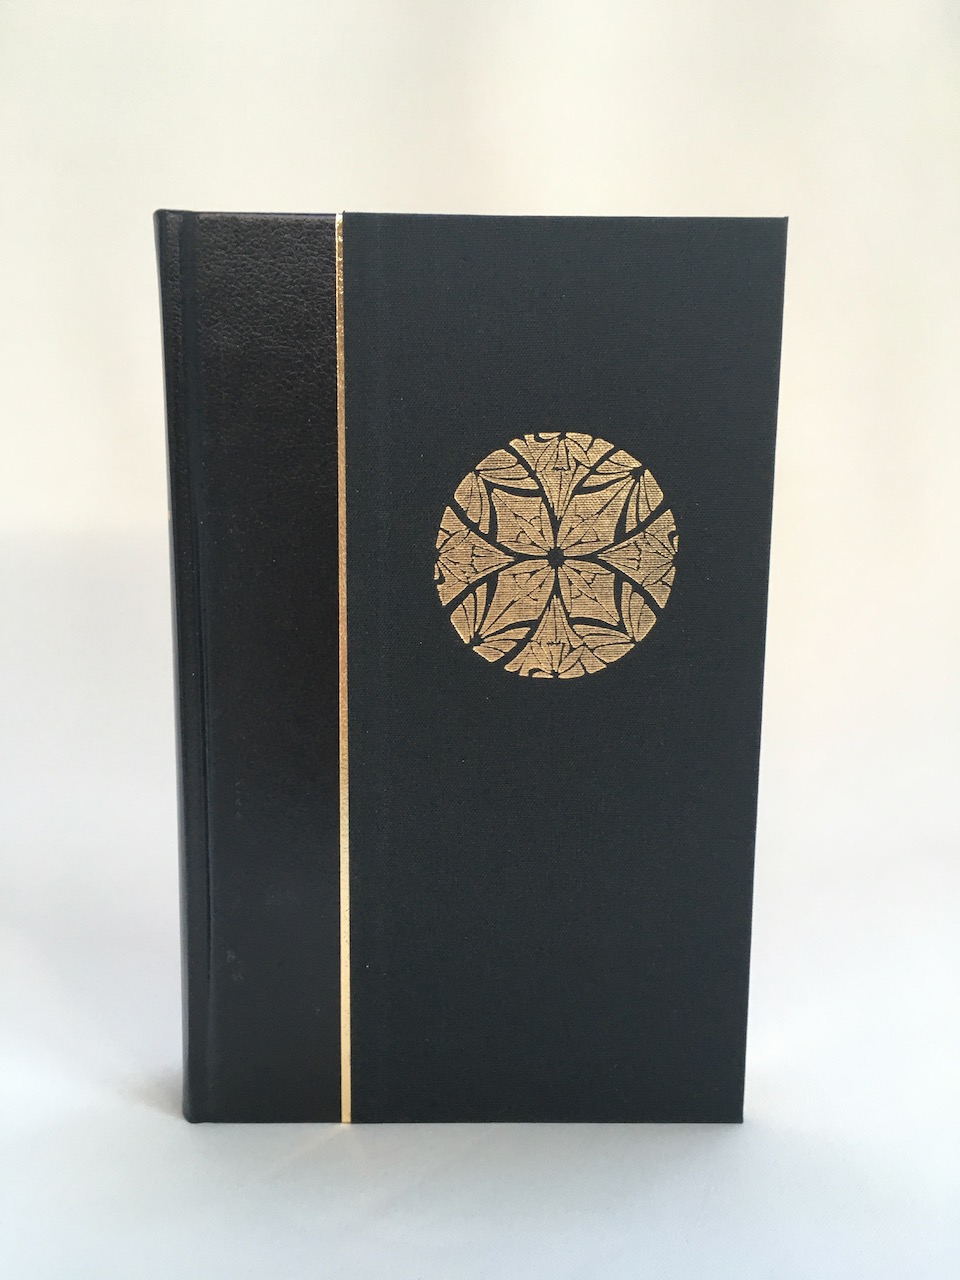 
Black Limited De Luxe edition of the Silmarillion 2002 11